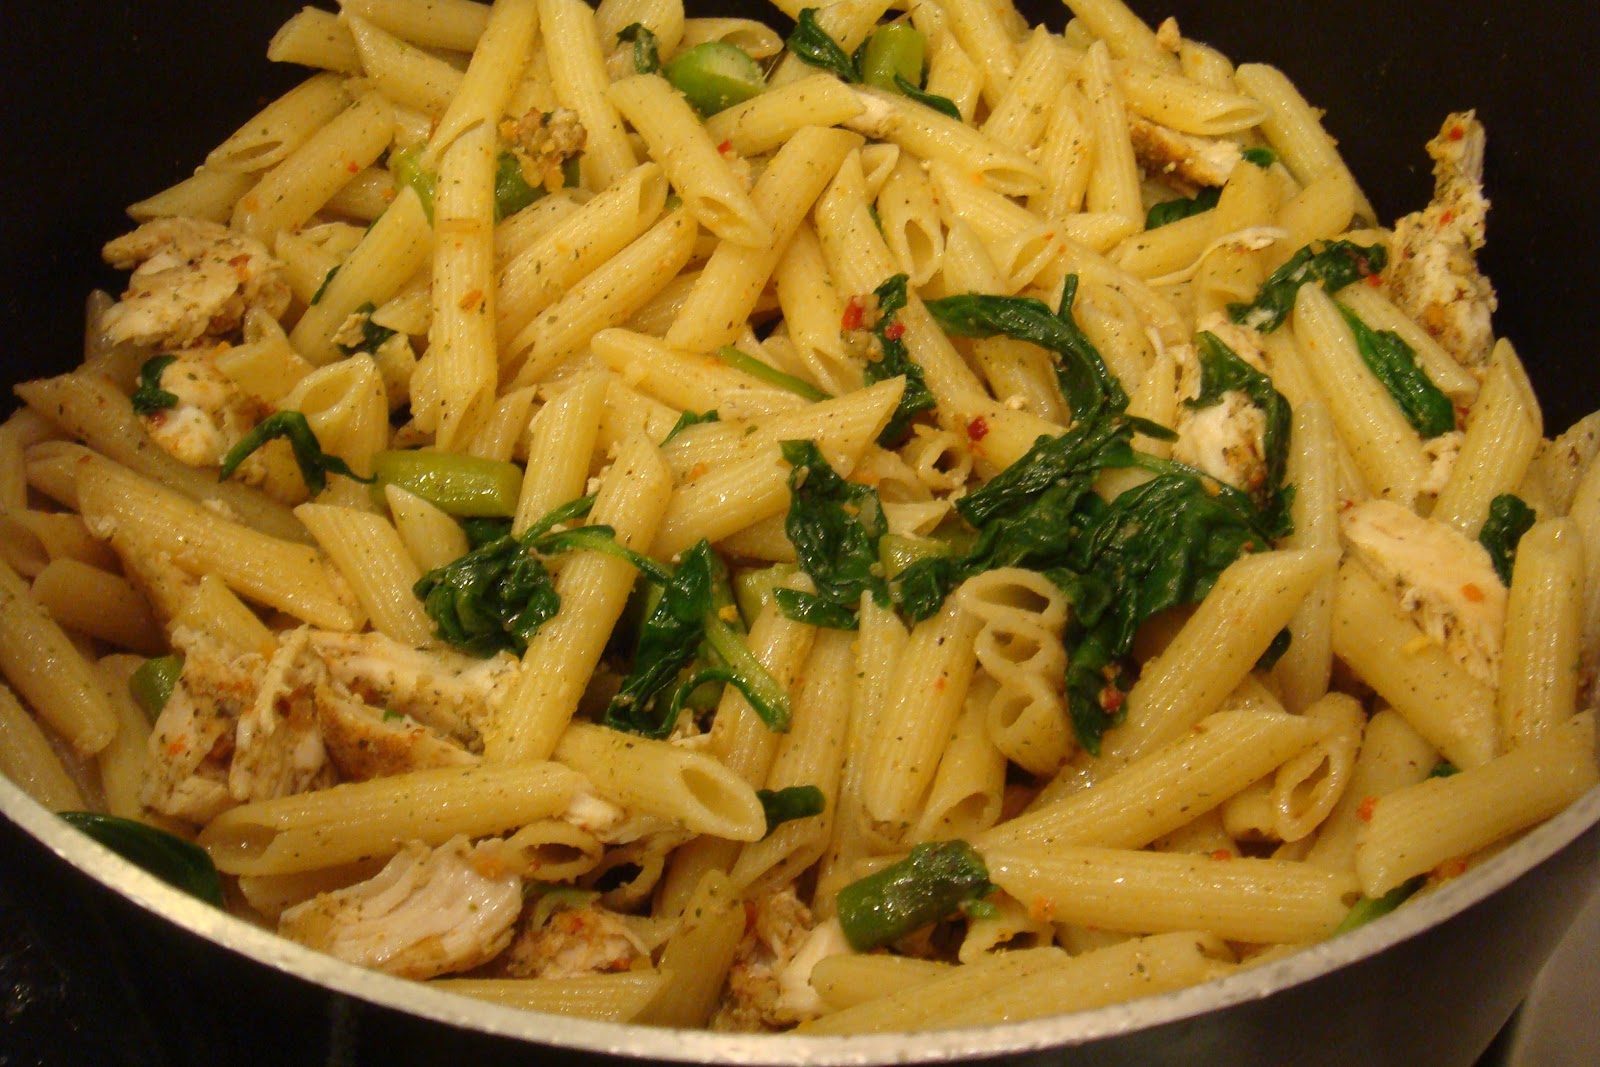 Gourmet Gibbs: Penne Pasta with Chicken, Spinach and Asparagus